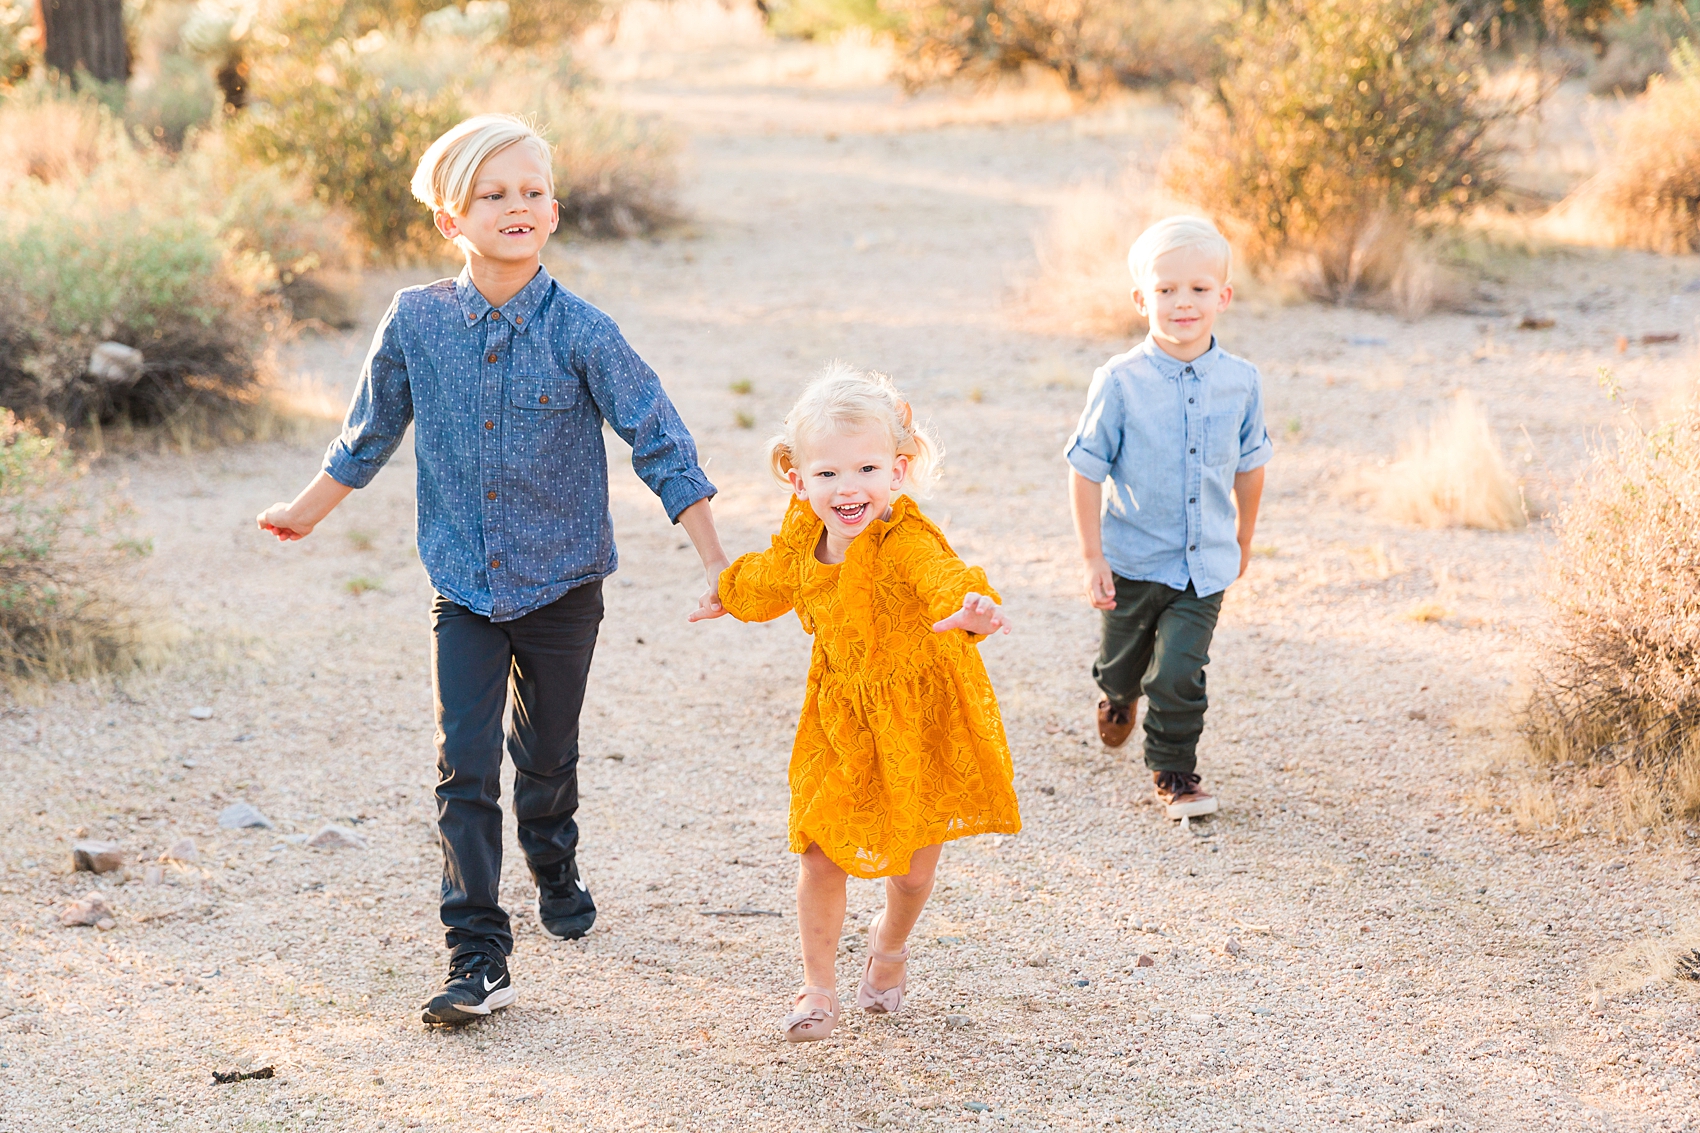 Leah Hope Photography | Scottsdale Phoenix Arizona | Desert Landscape Cactus Scenery | Family Pictures | What to Wear | Family Poses | Lifestyle